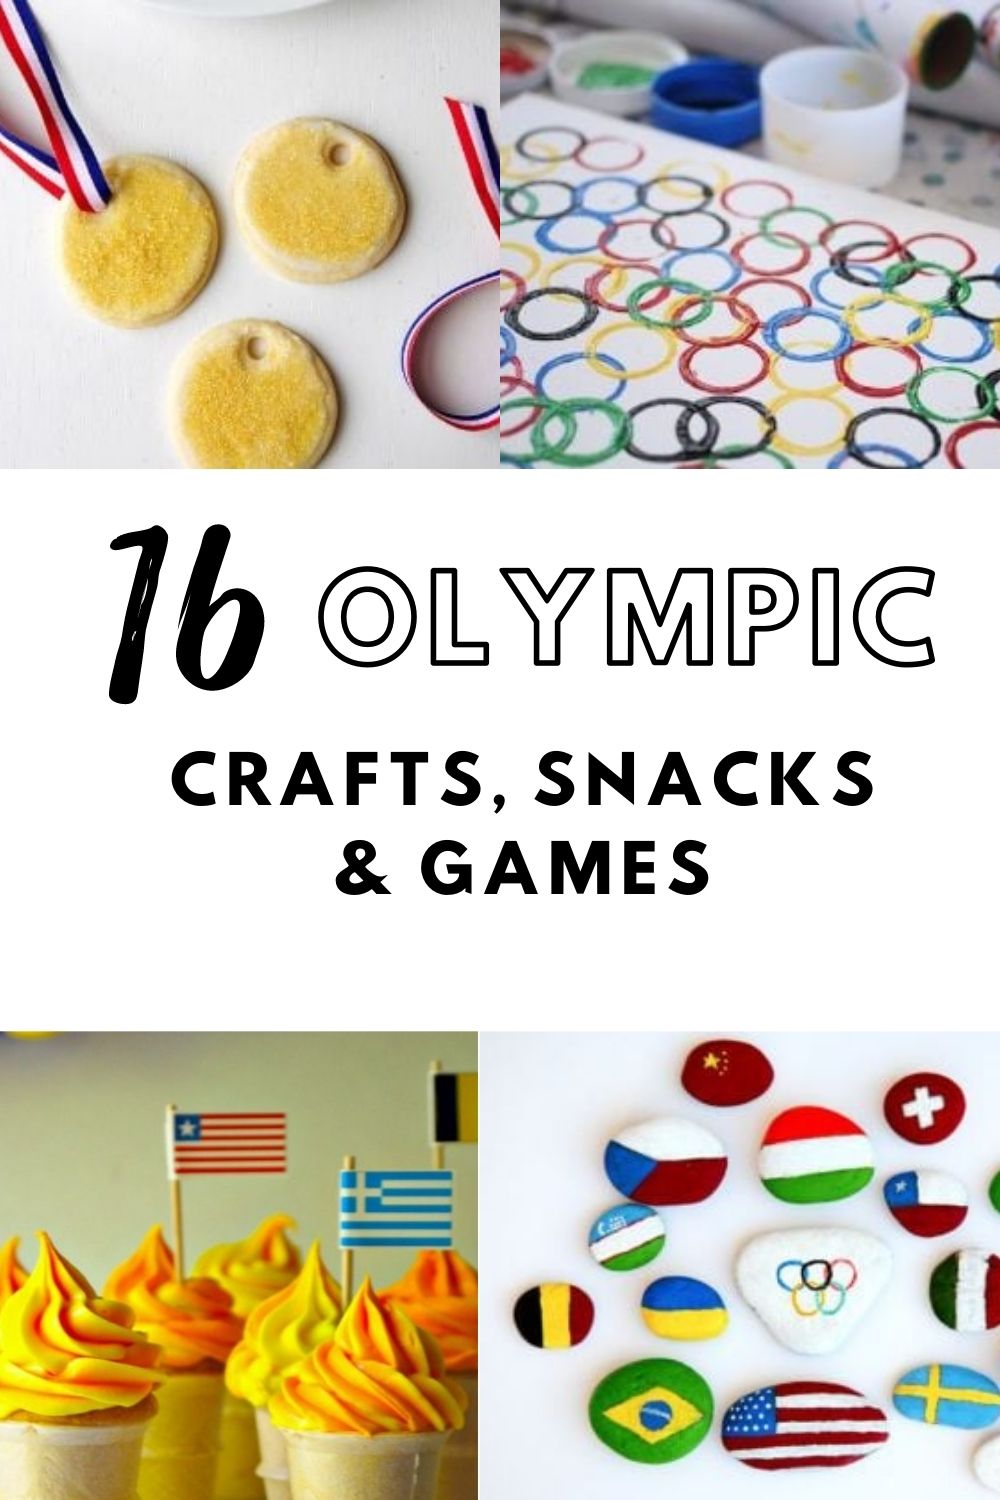 The Olympics are a perfect time to get crafty!  Here are 16 kid friendly Olympic Crafts, Snacks and Games.  Great for all ages! 